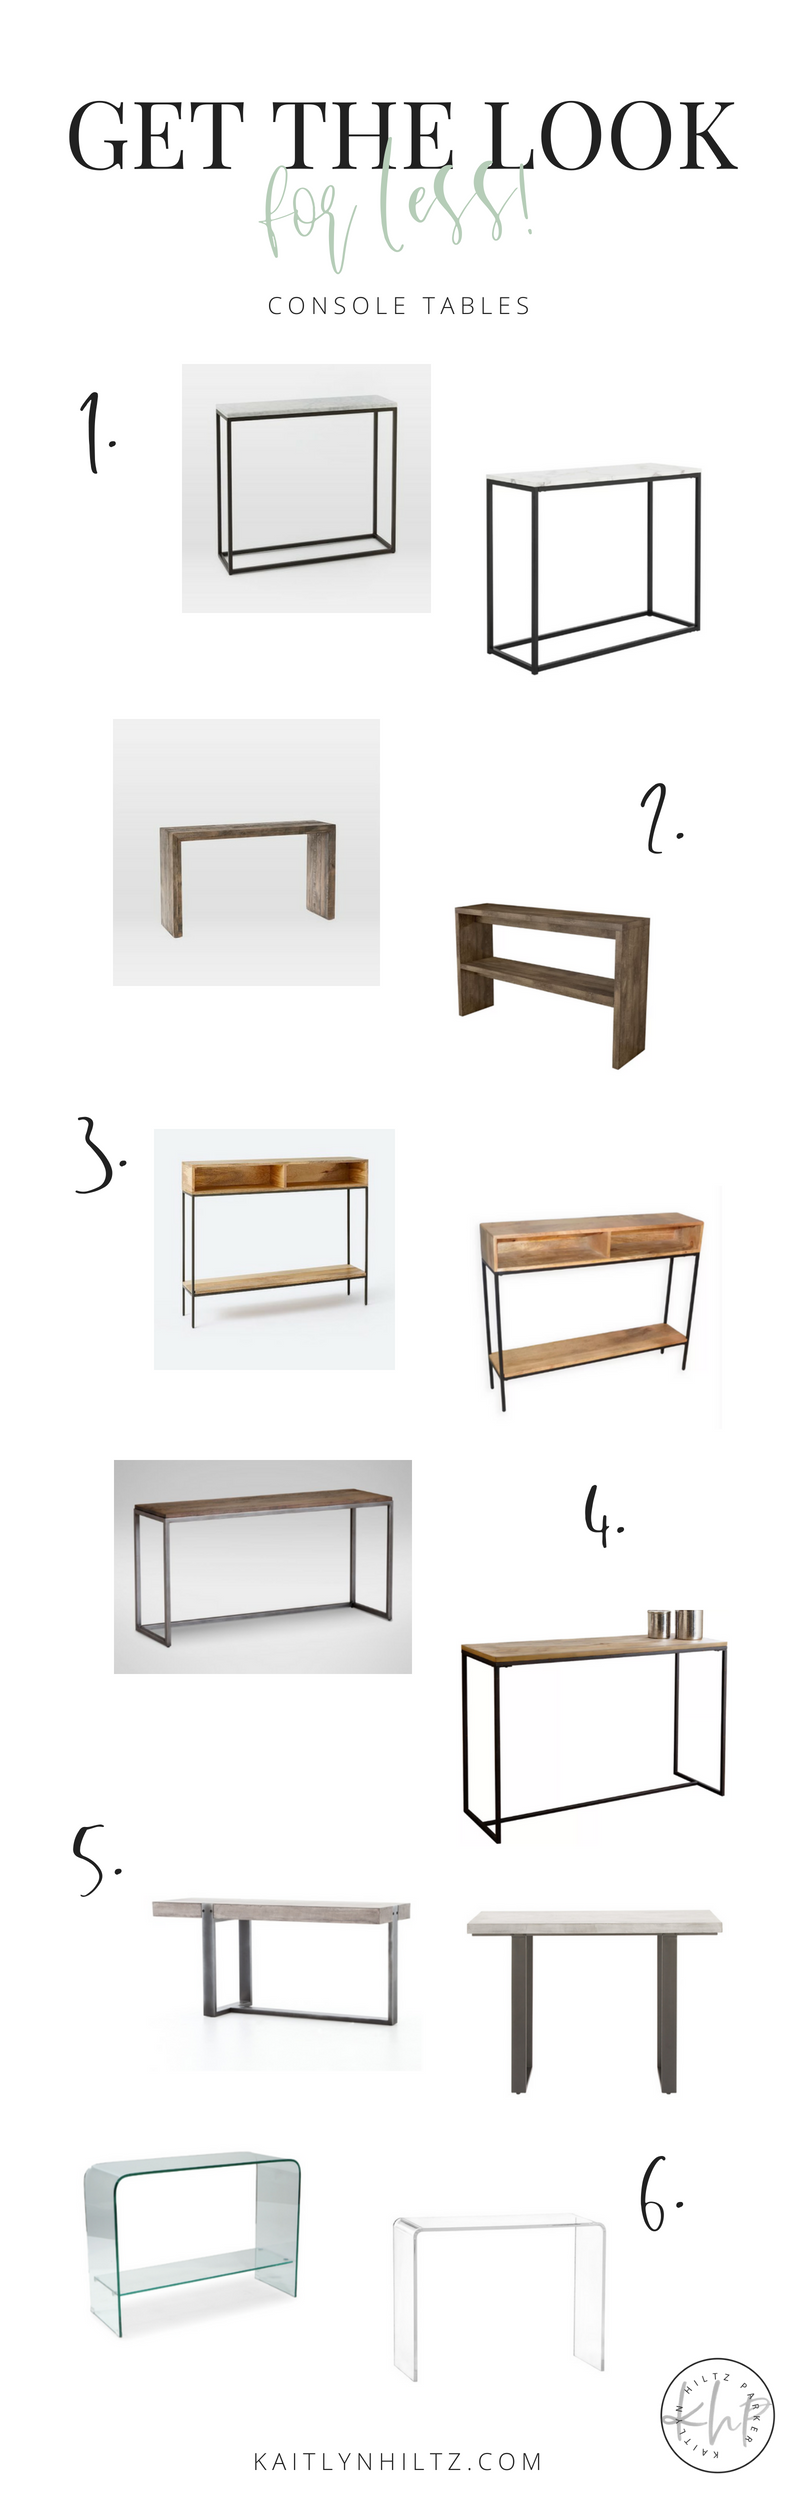 Get the Look for Less: Console Tables - kaitlynhiltz.com